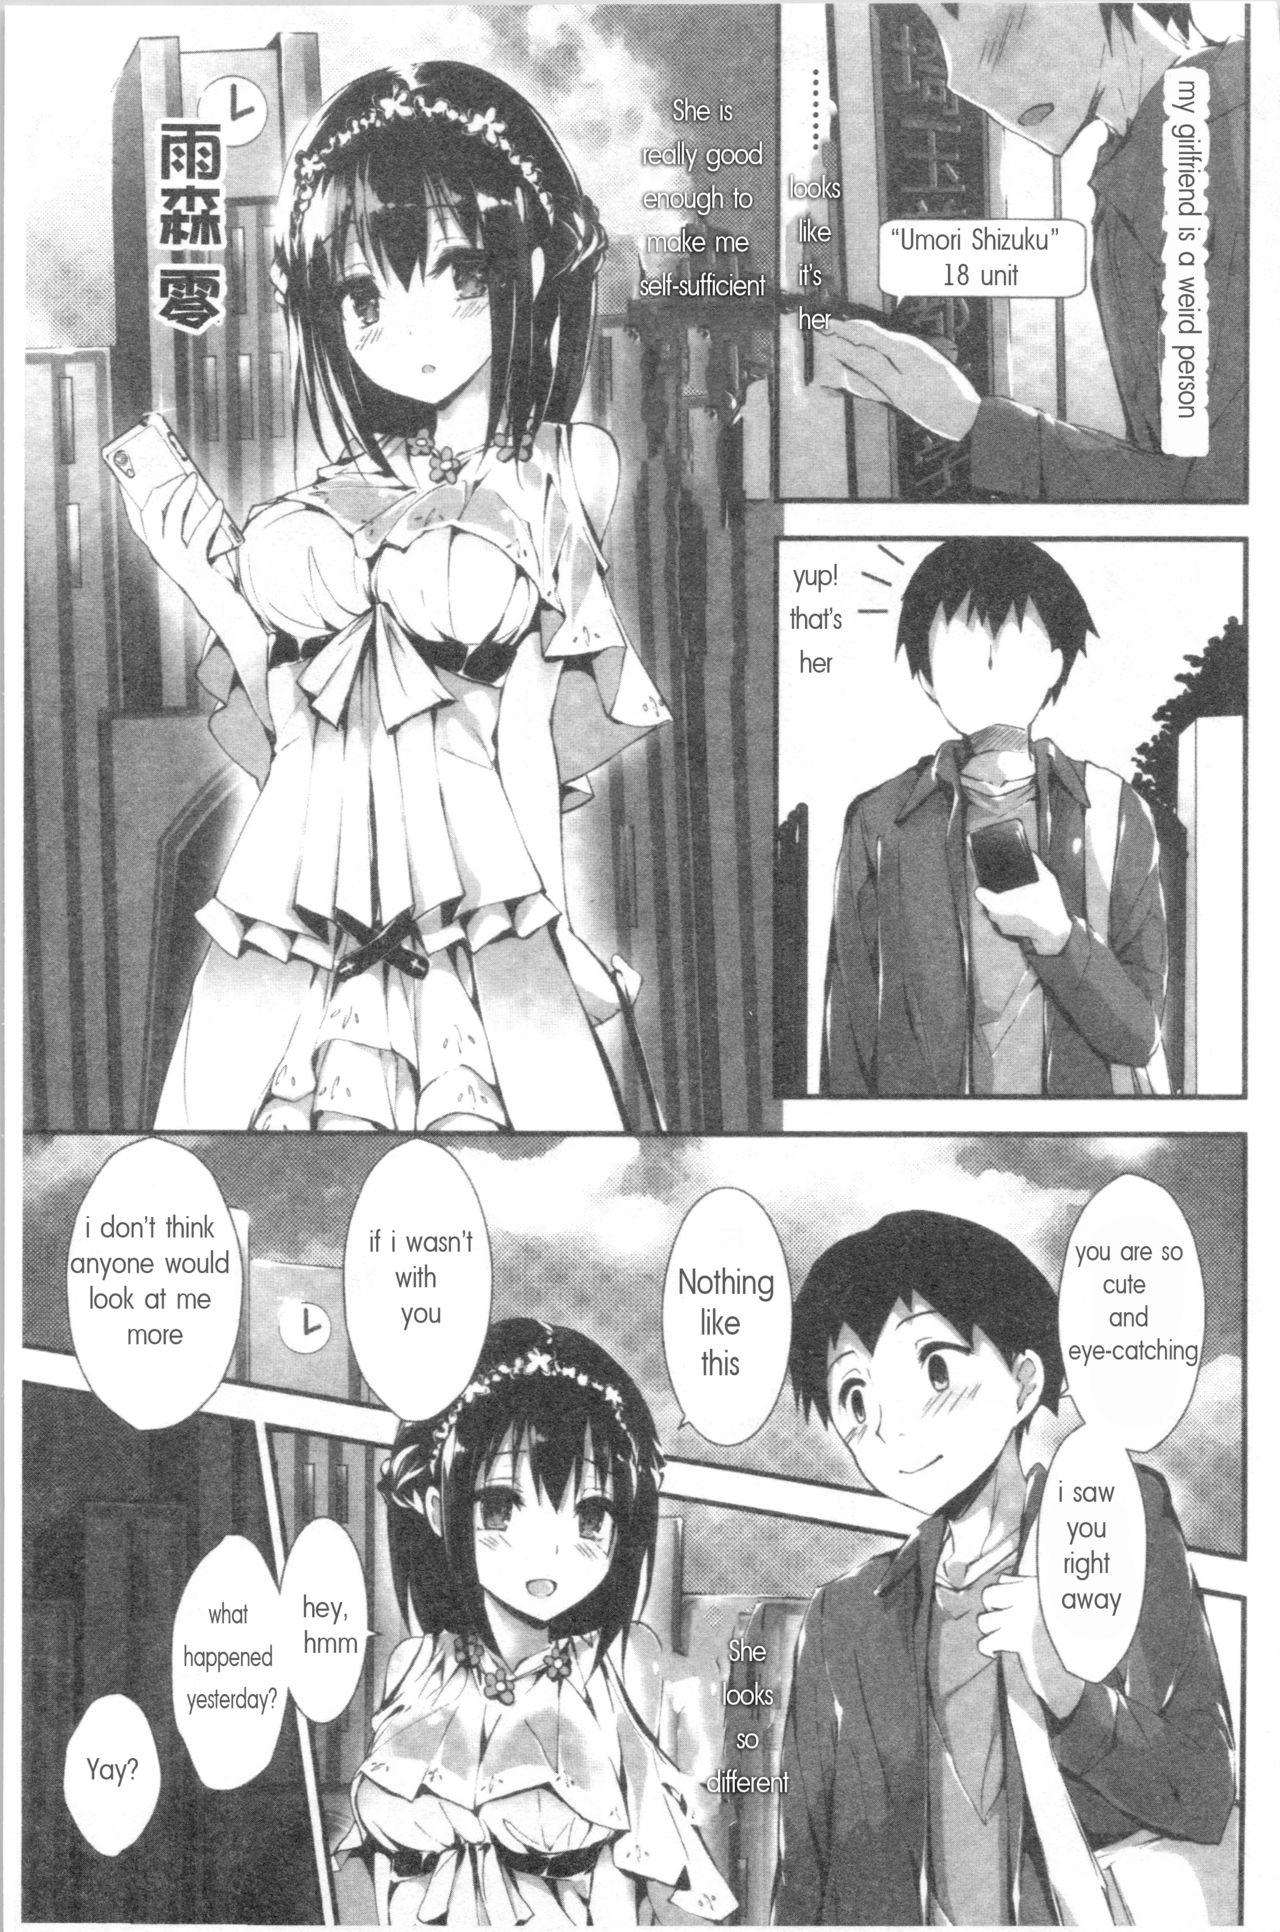 Best she is really good enough to make me self sufficient | Kanrichuu no Sore o Shibatte Agetai Small Tits - Page 13